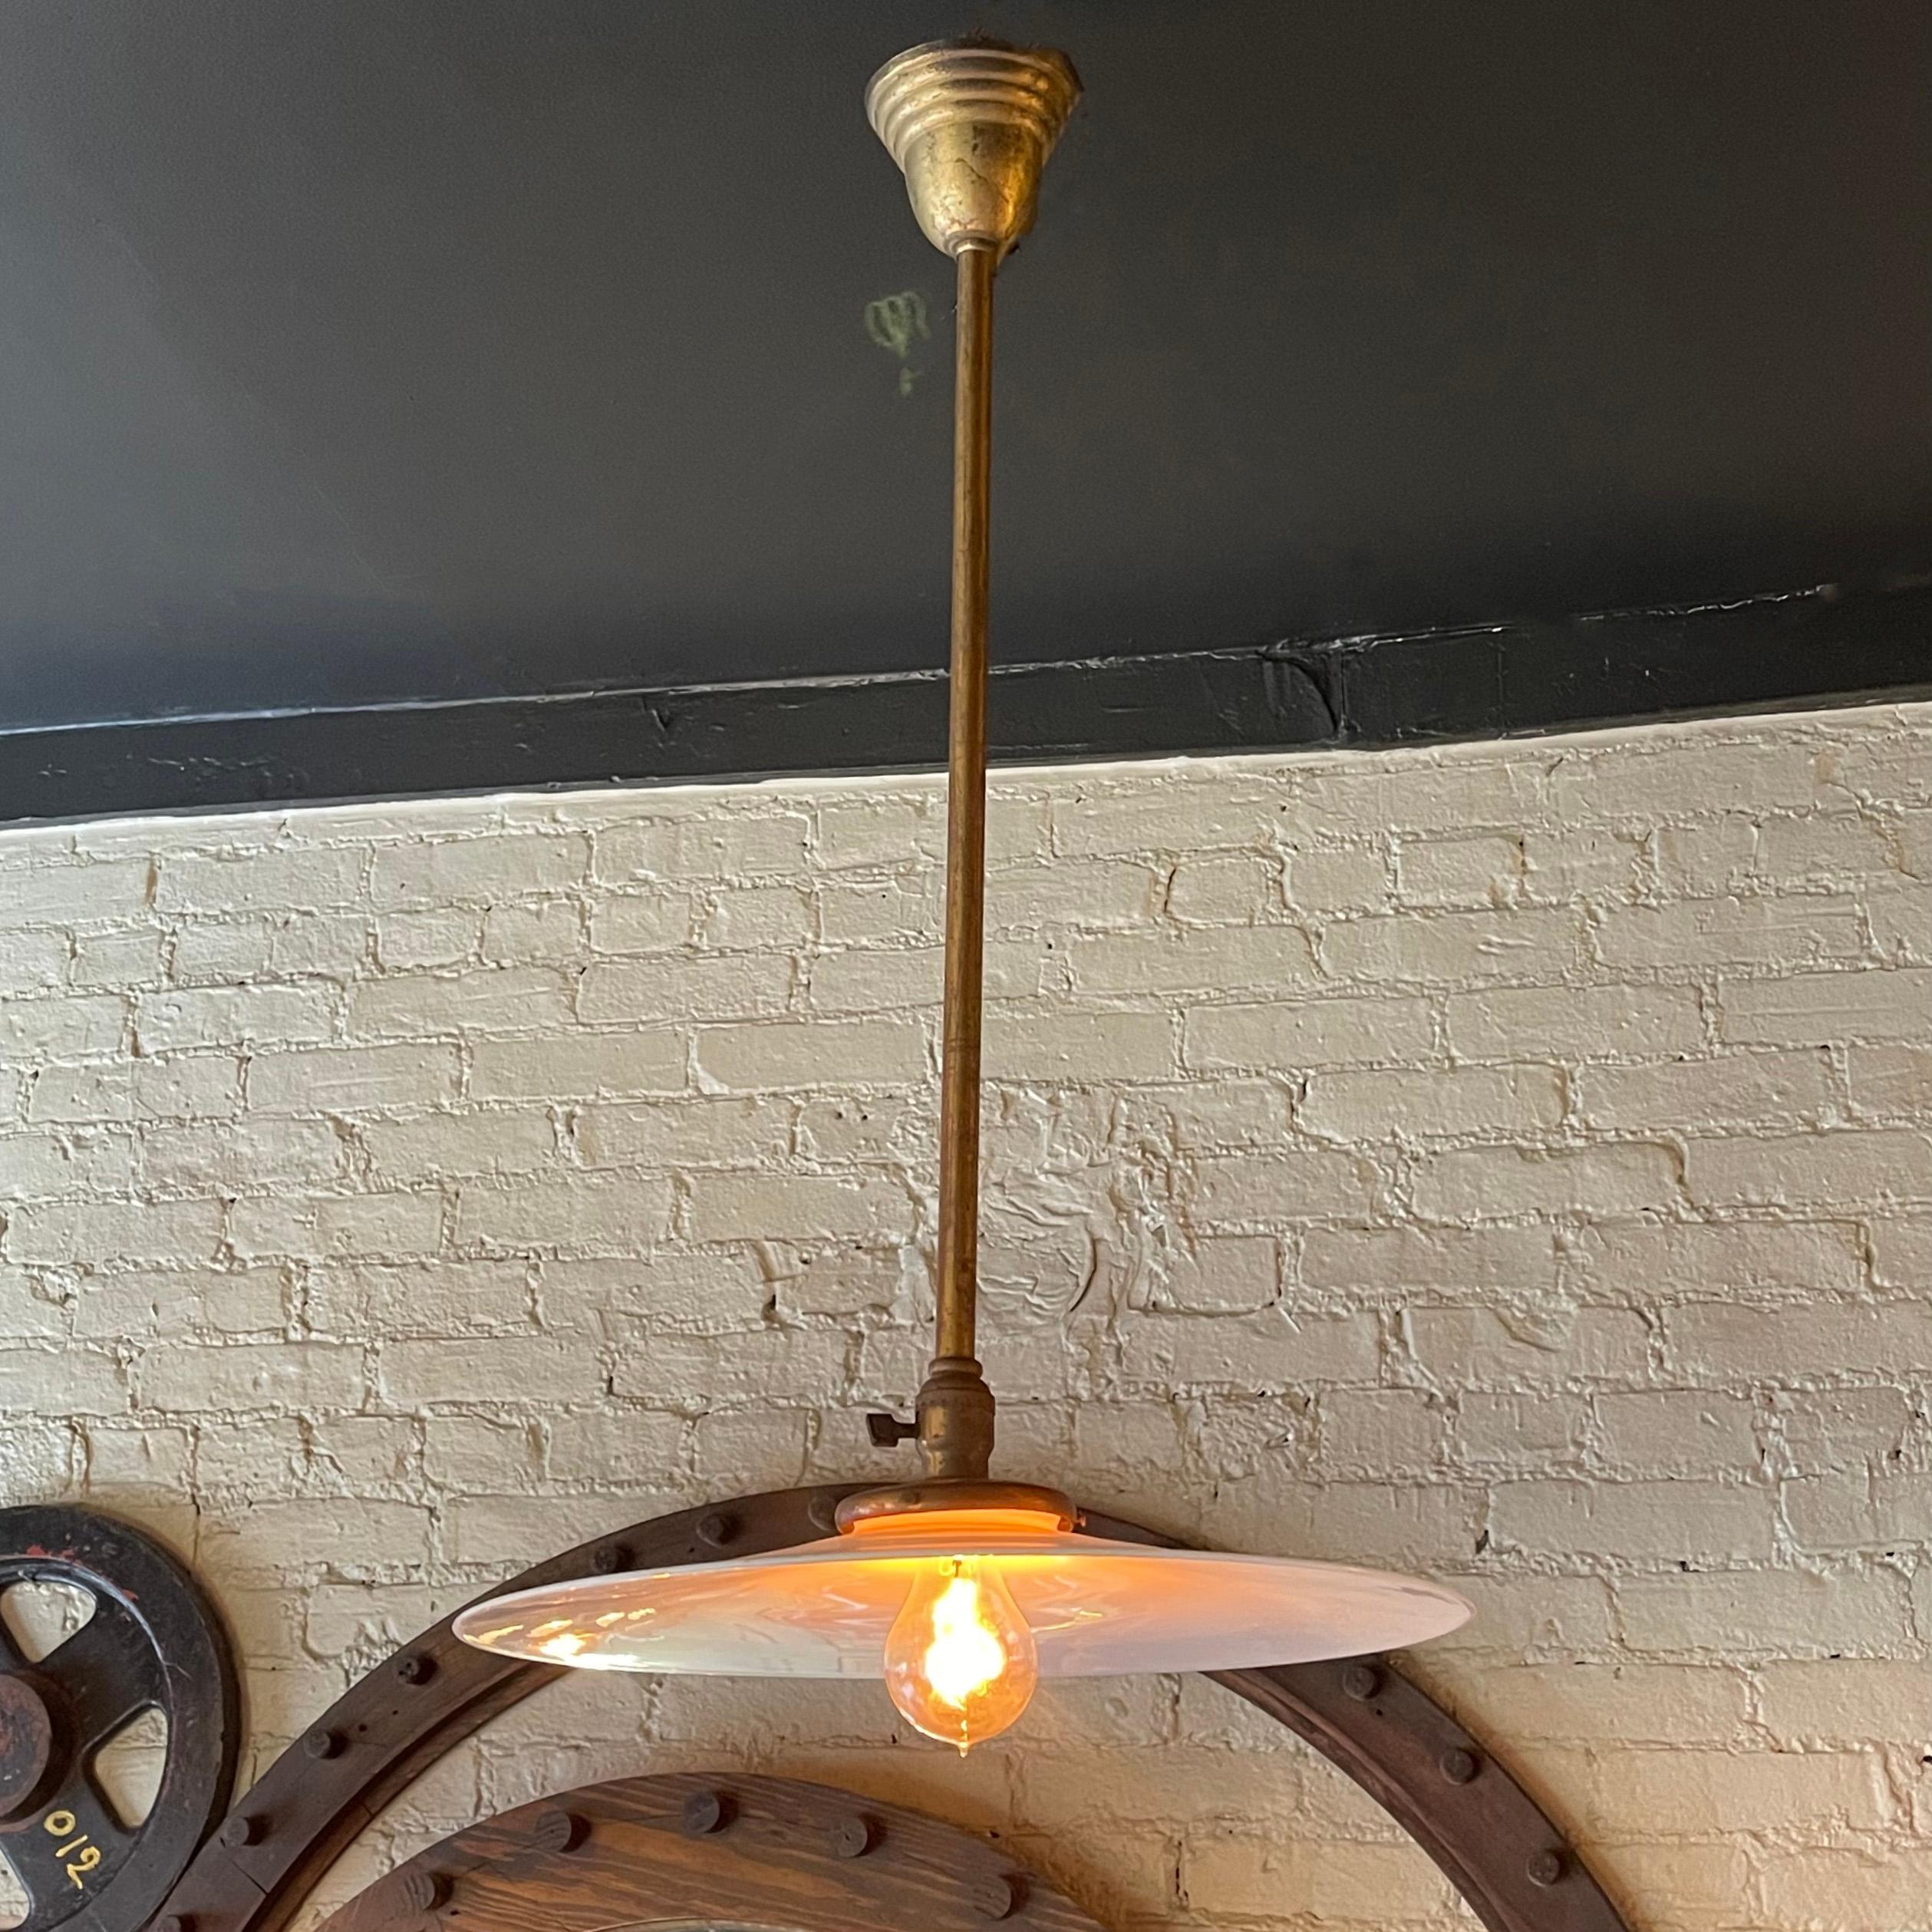 Early 20th century, industrial pendant light features a large 18 inch diameter, opaque, milk glass disc shade on a patinated brass pole with brass canopy and paddle switch hardware.